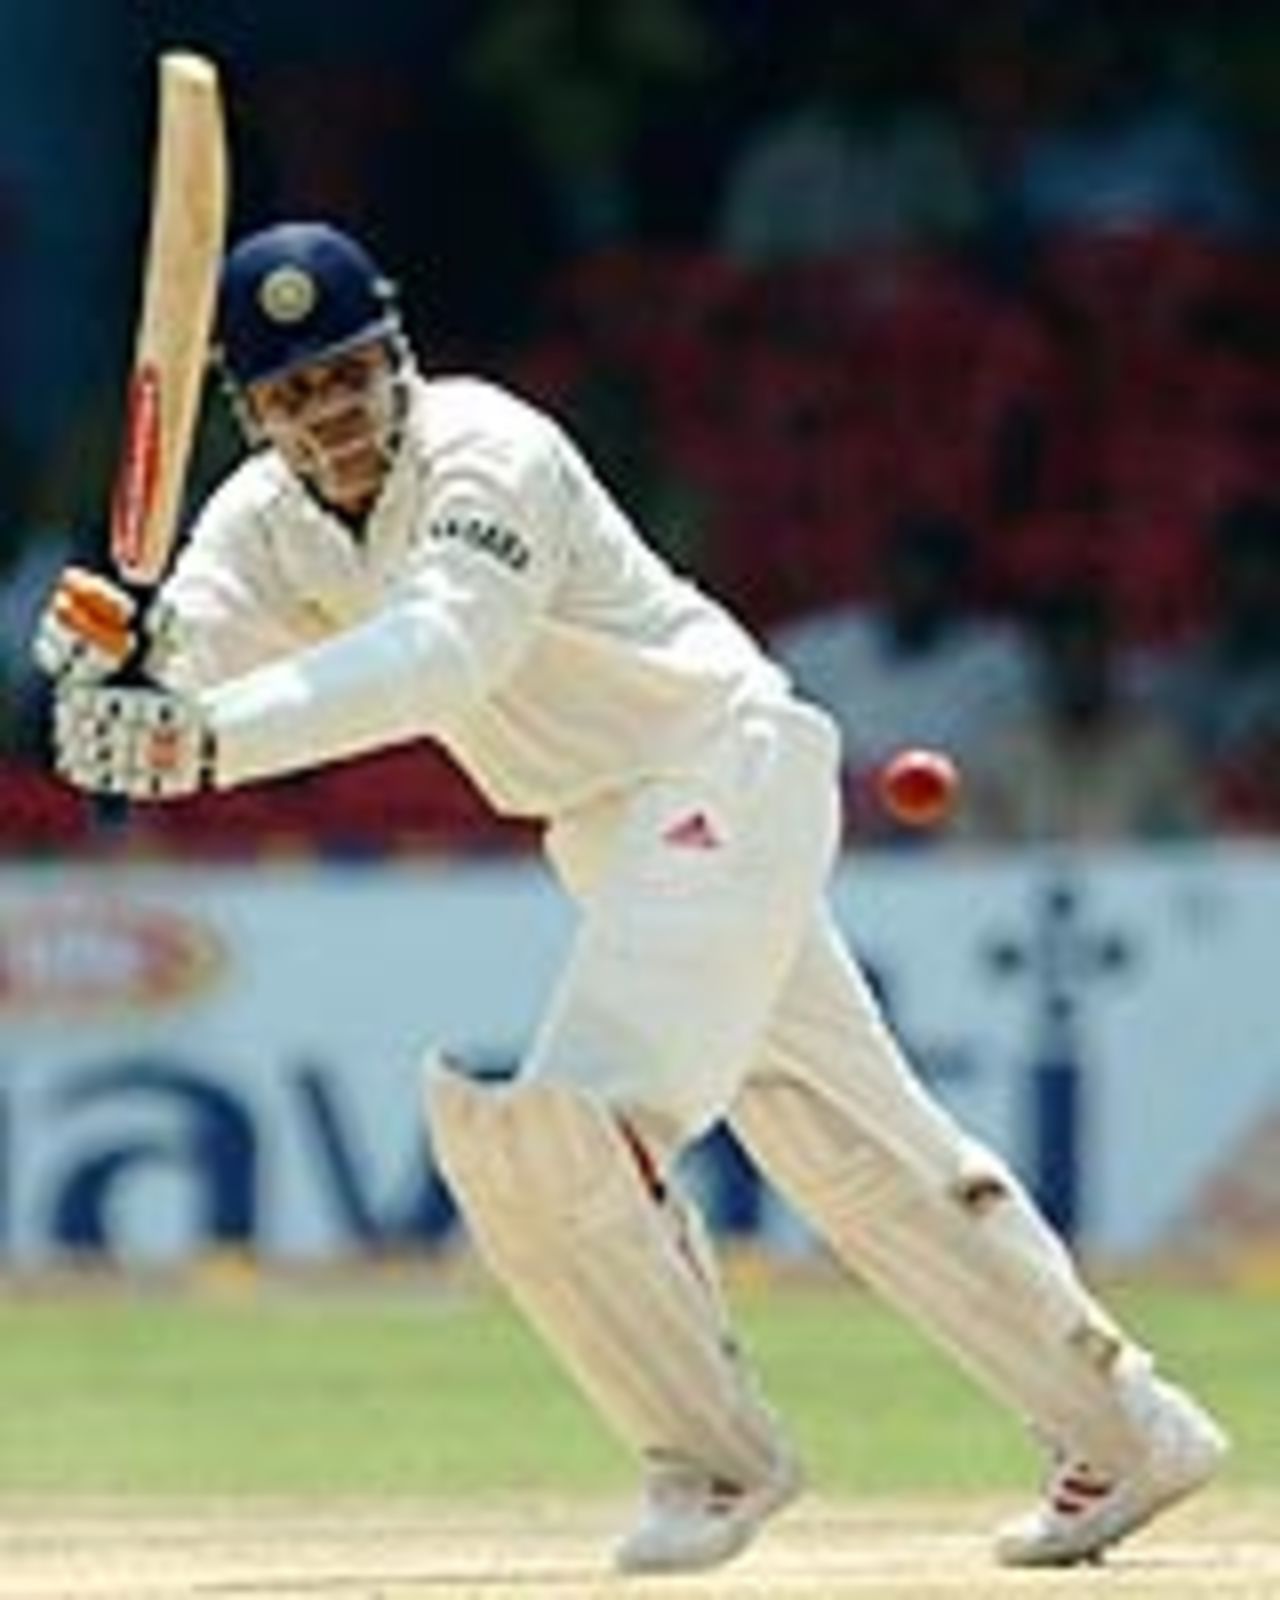 The dismissal of Virender Sehwag ended India's hopes to chase the target, India v Pakistan, 3rd Test, Bangalore, 5th day, March 28, 2005